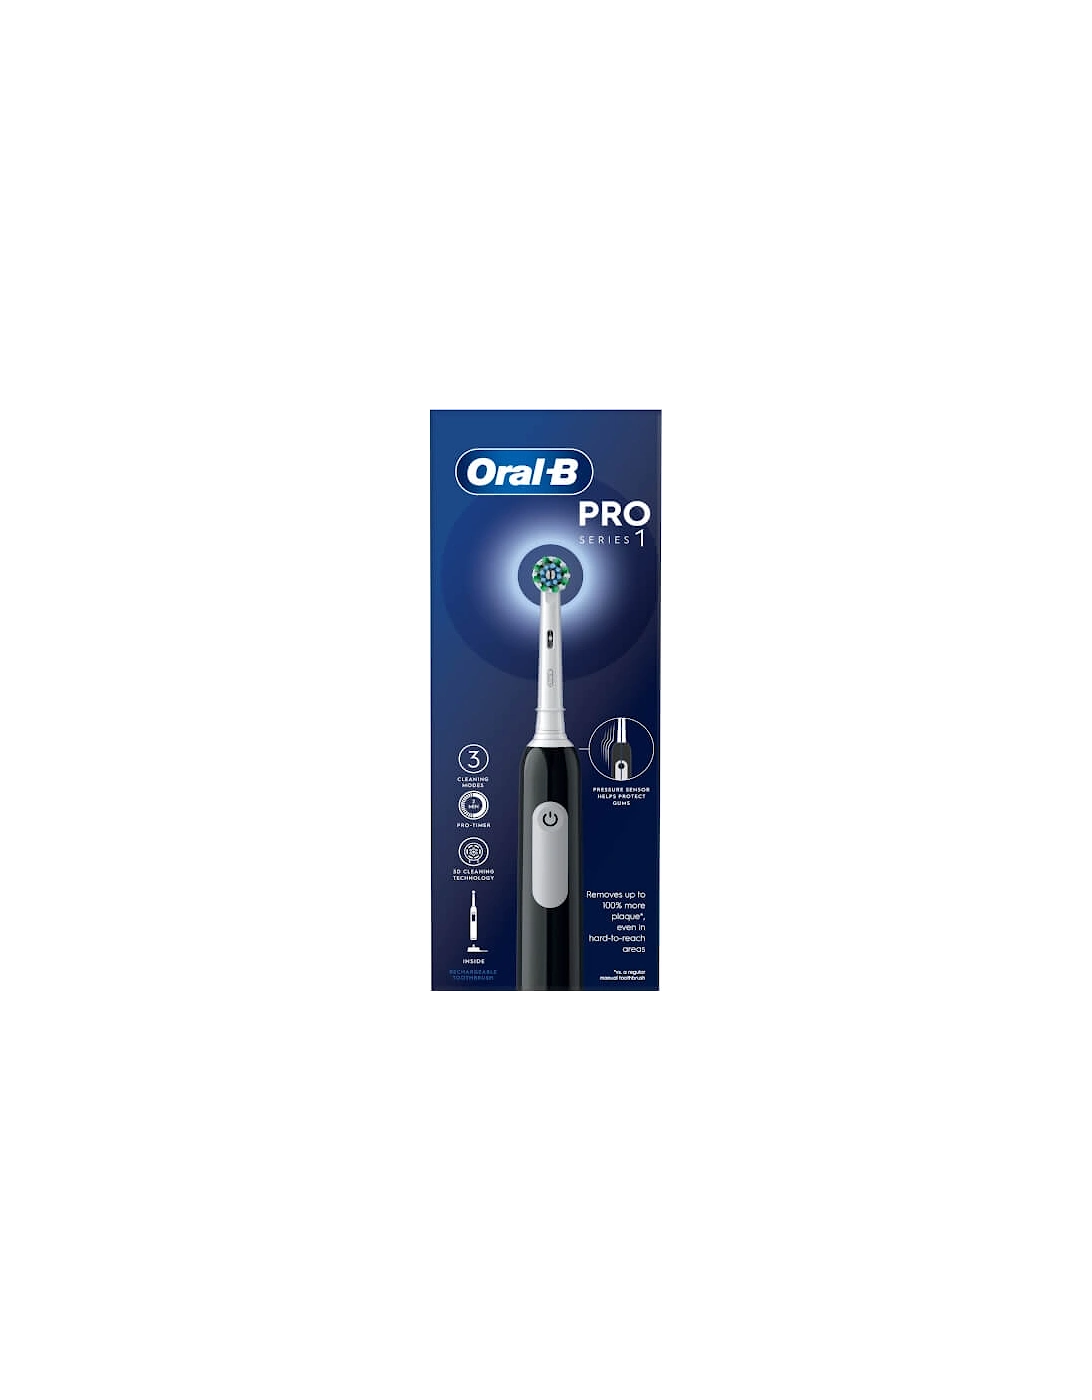 Pro Series 1 Cross Action Black Electric Rechargeable Toothbrush, 2 of 1